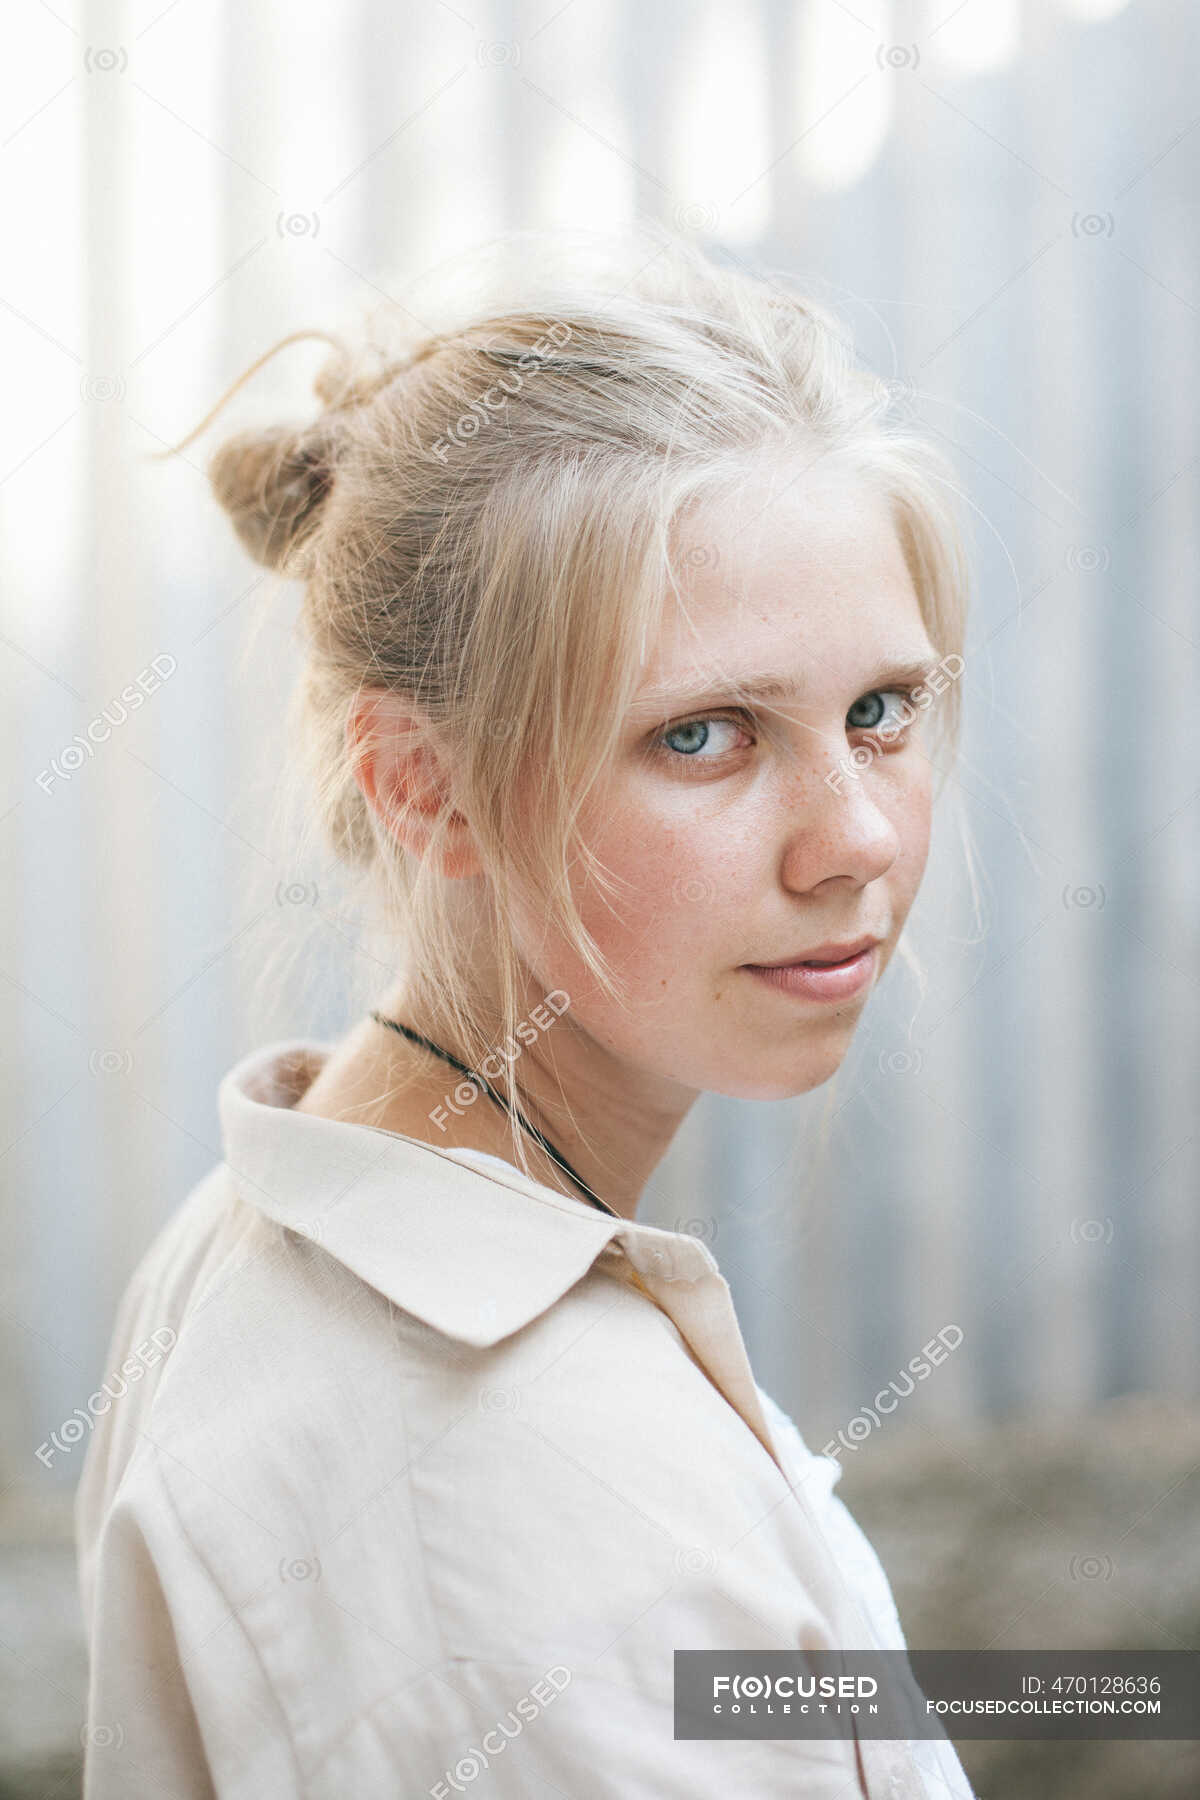 Woman with blonde hair pretty pictures of Beautiful Little